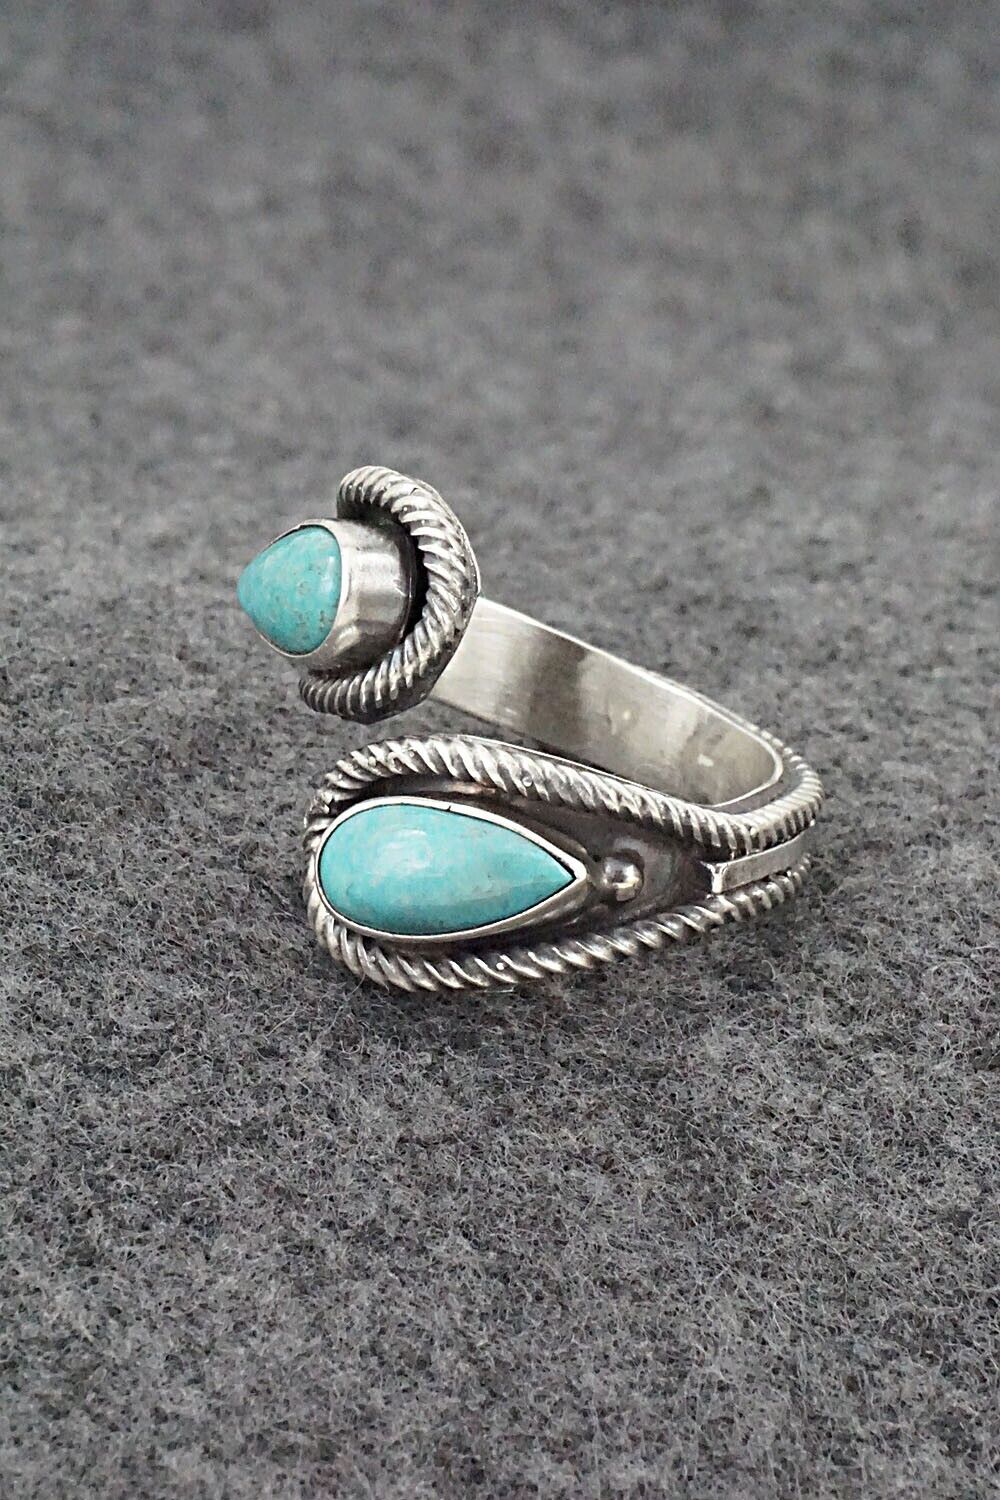 Turquoise & Sterling Silver Ring - Kenny Lonjose - Size 8.5